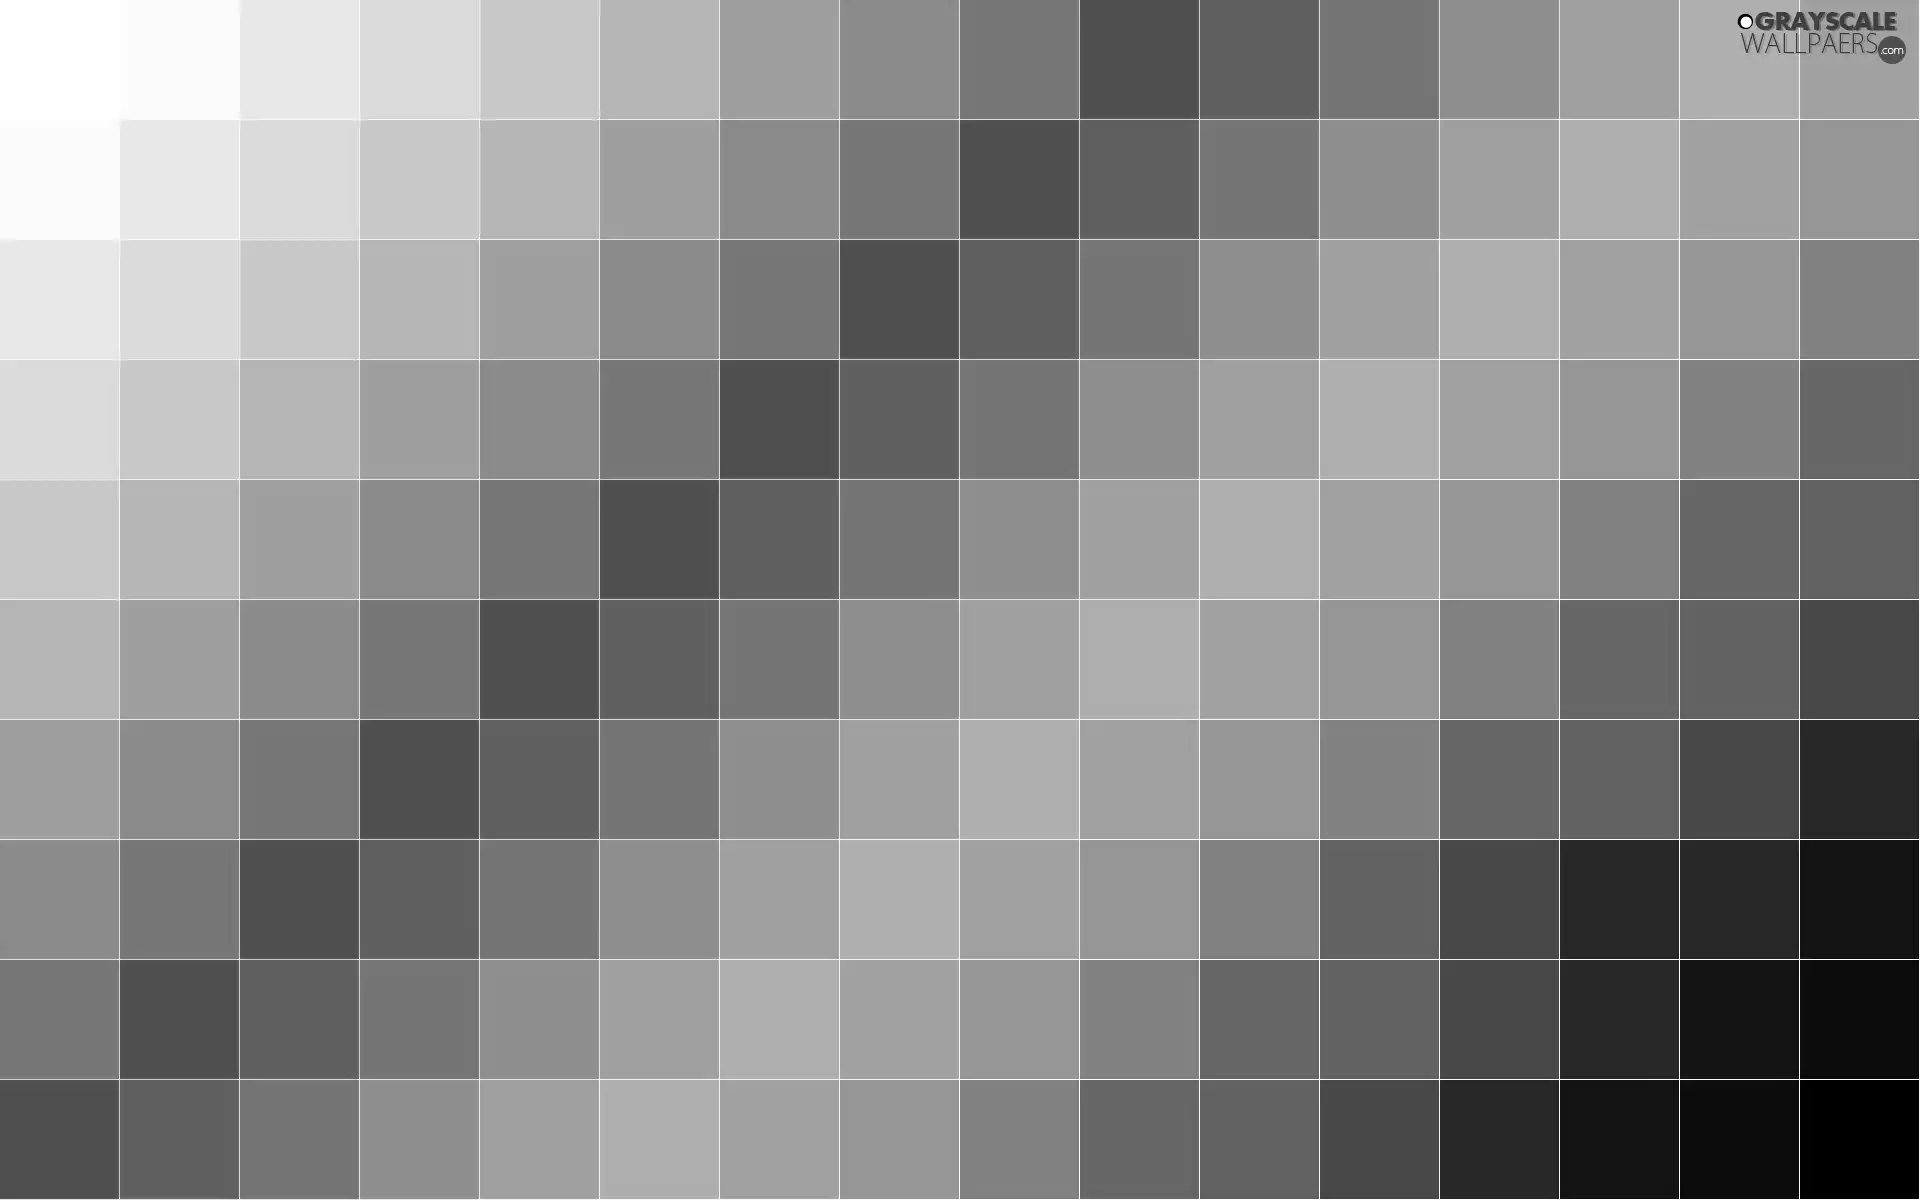 background, color, squares